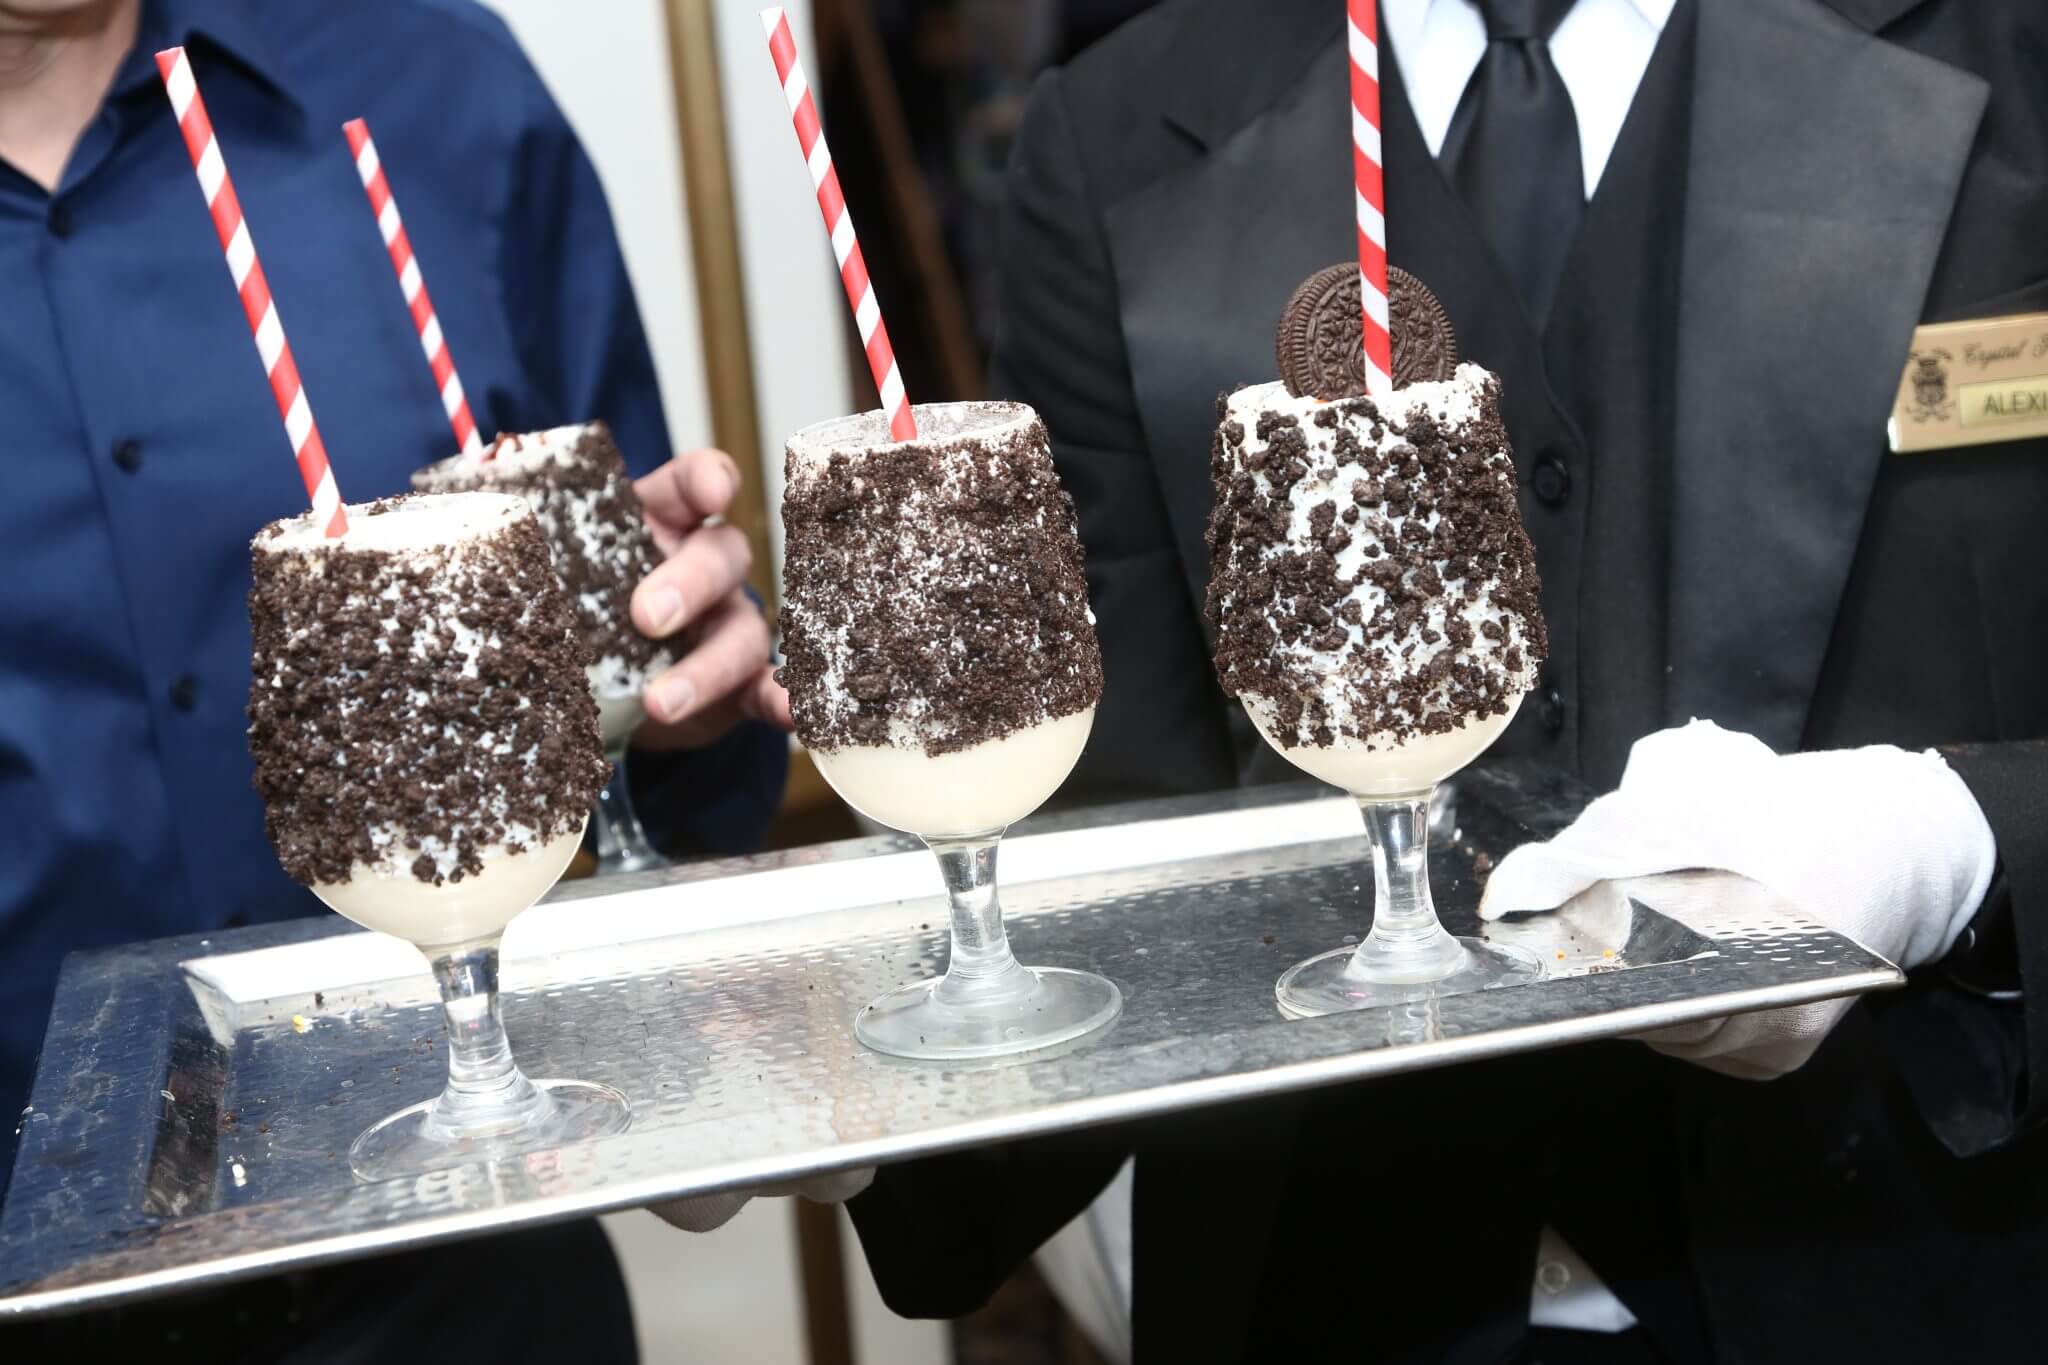 Waiter holding a tray with three extravagant chocolate milkshakes garnished with cookies and topped with whipped cream.